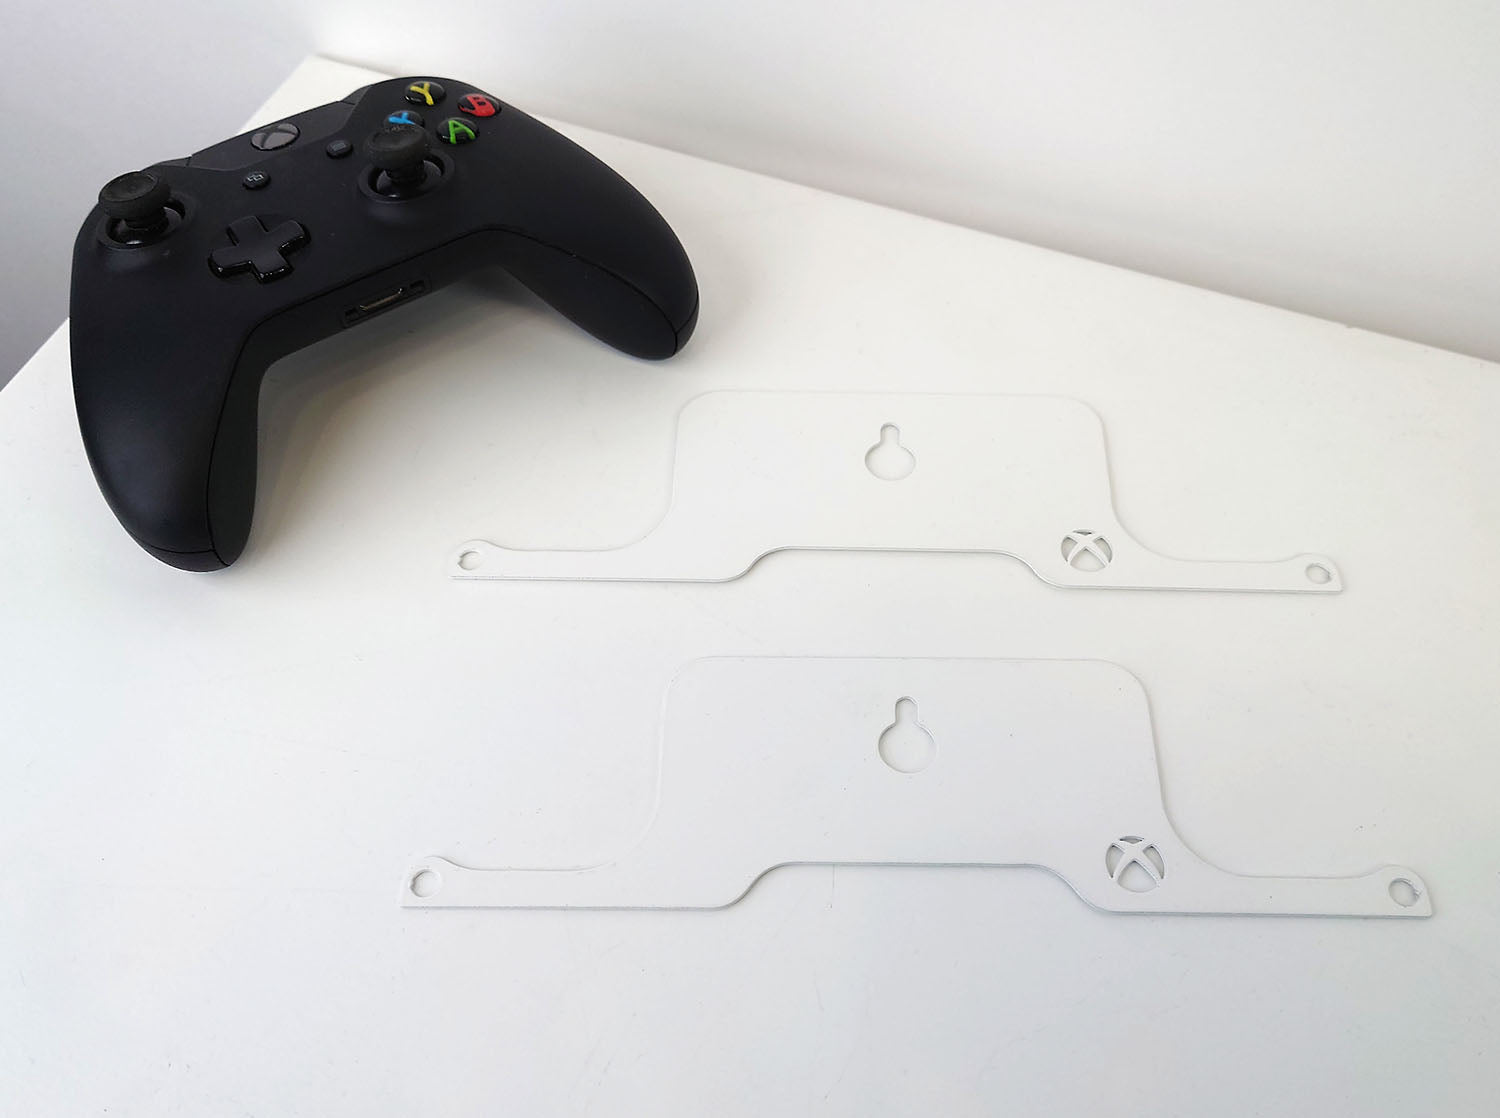 Controller next to flat-packed brackets, ready for assembly